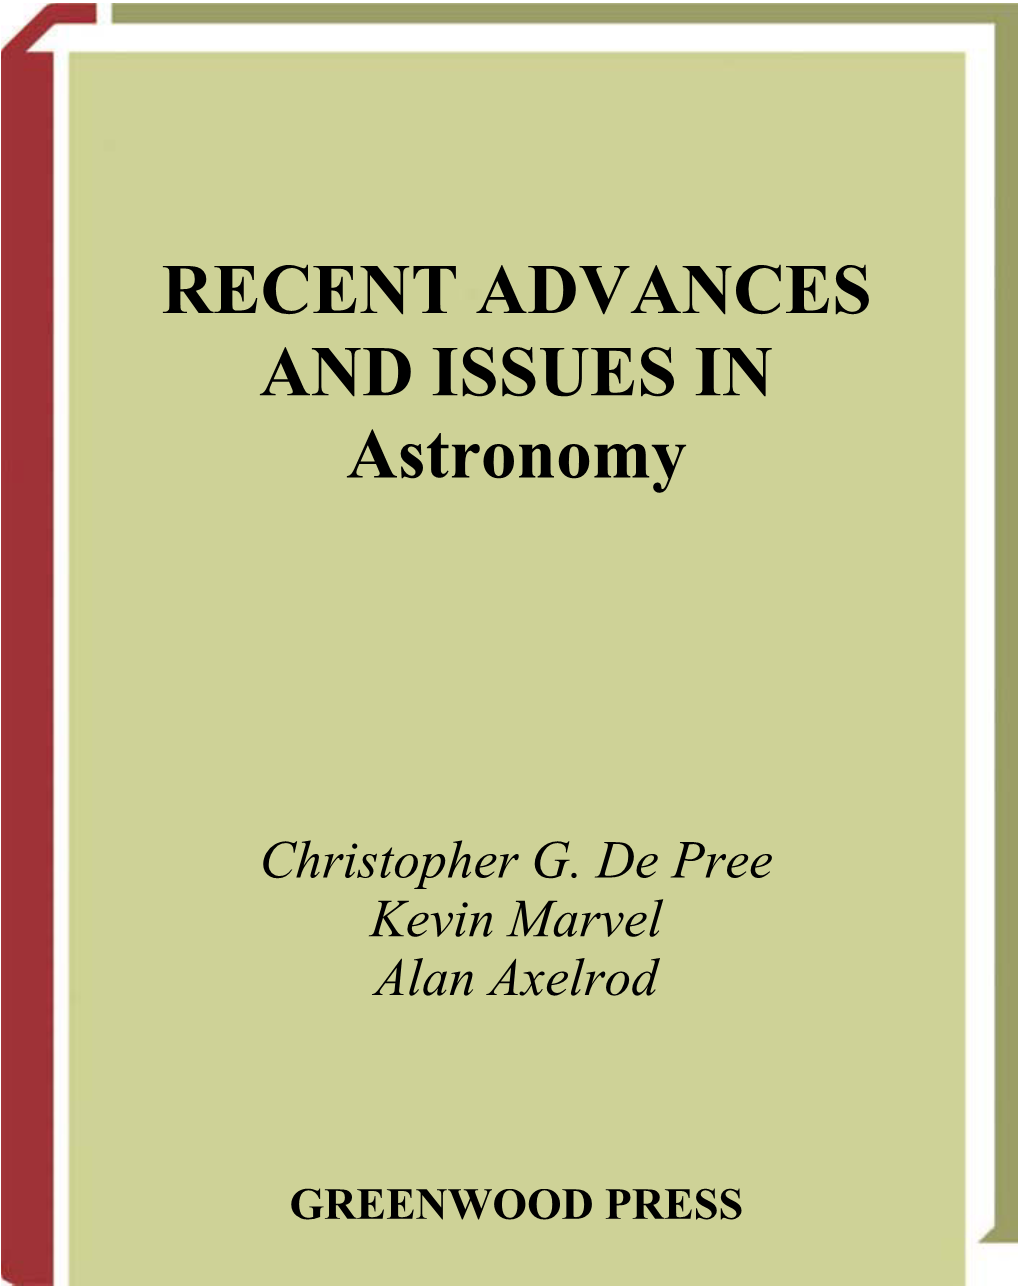 RECENT ADVANCES and ISSUES in Astronomy